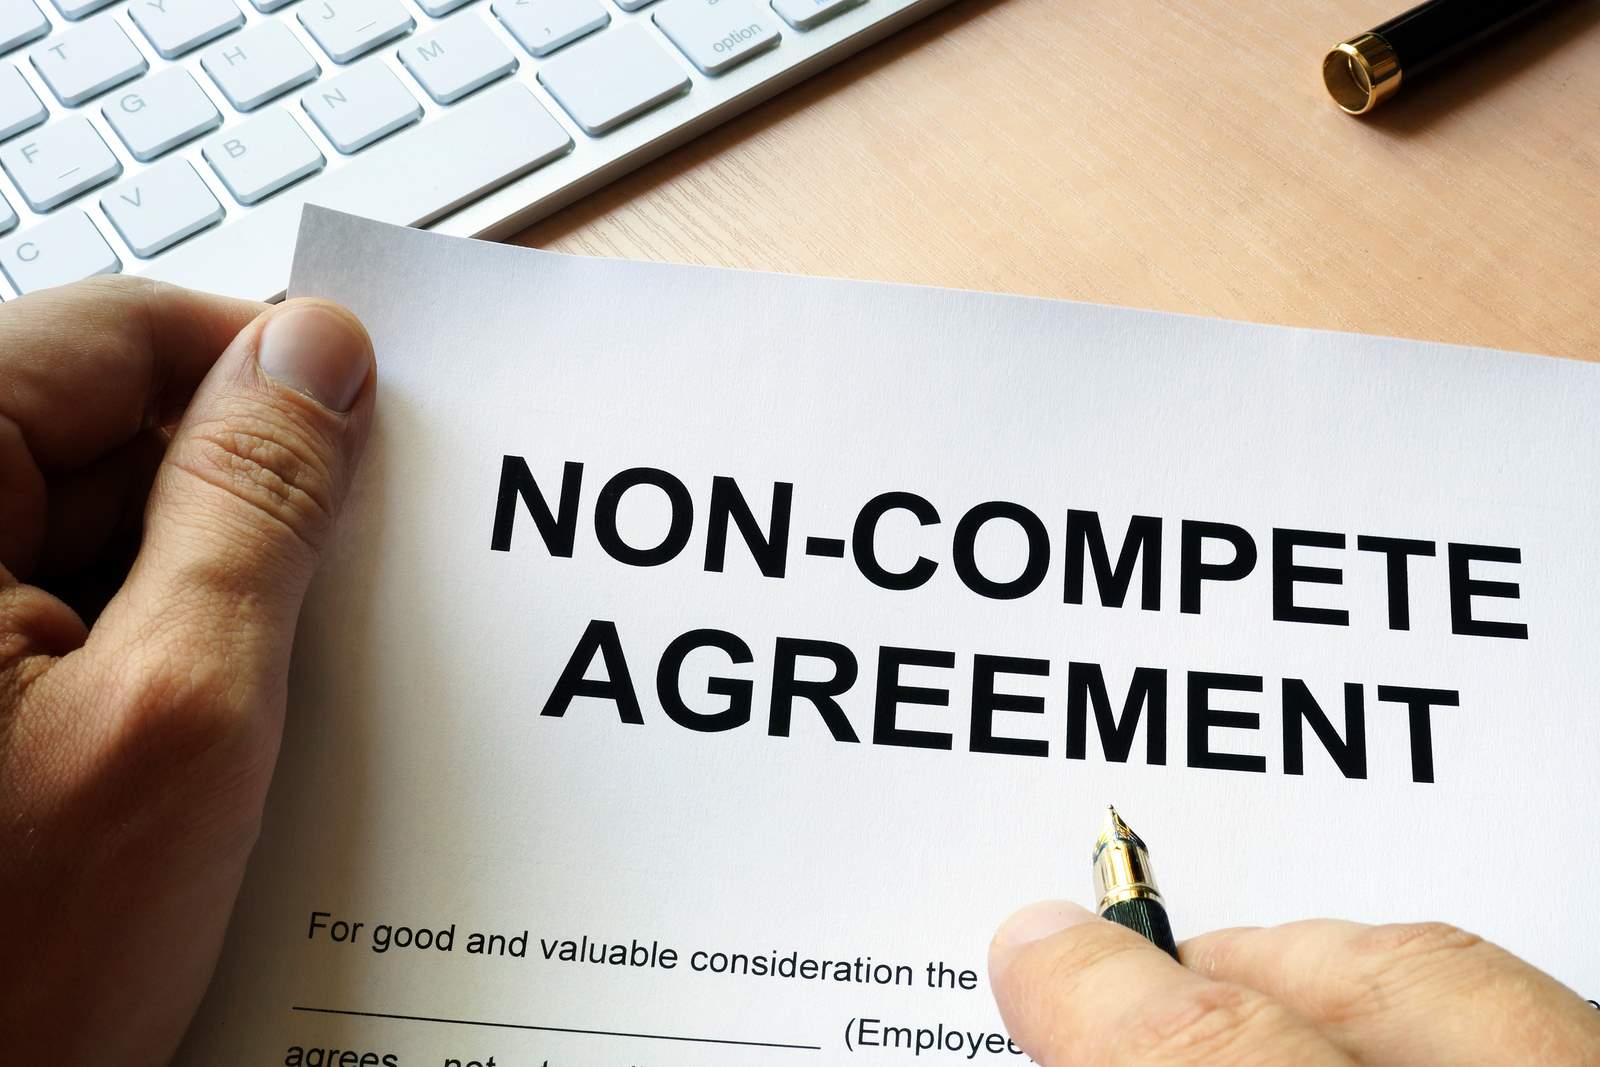 Non compete agreement in Florida - Dolman Law Group Accident Injury Lawyers, PA